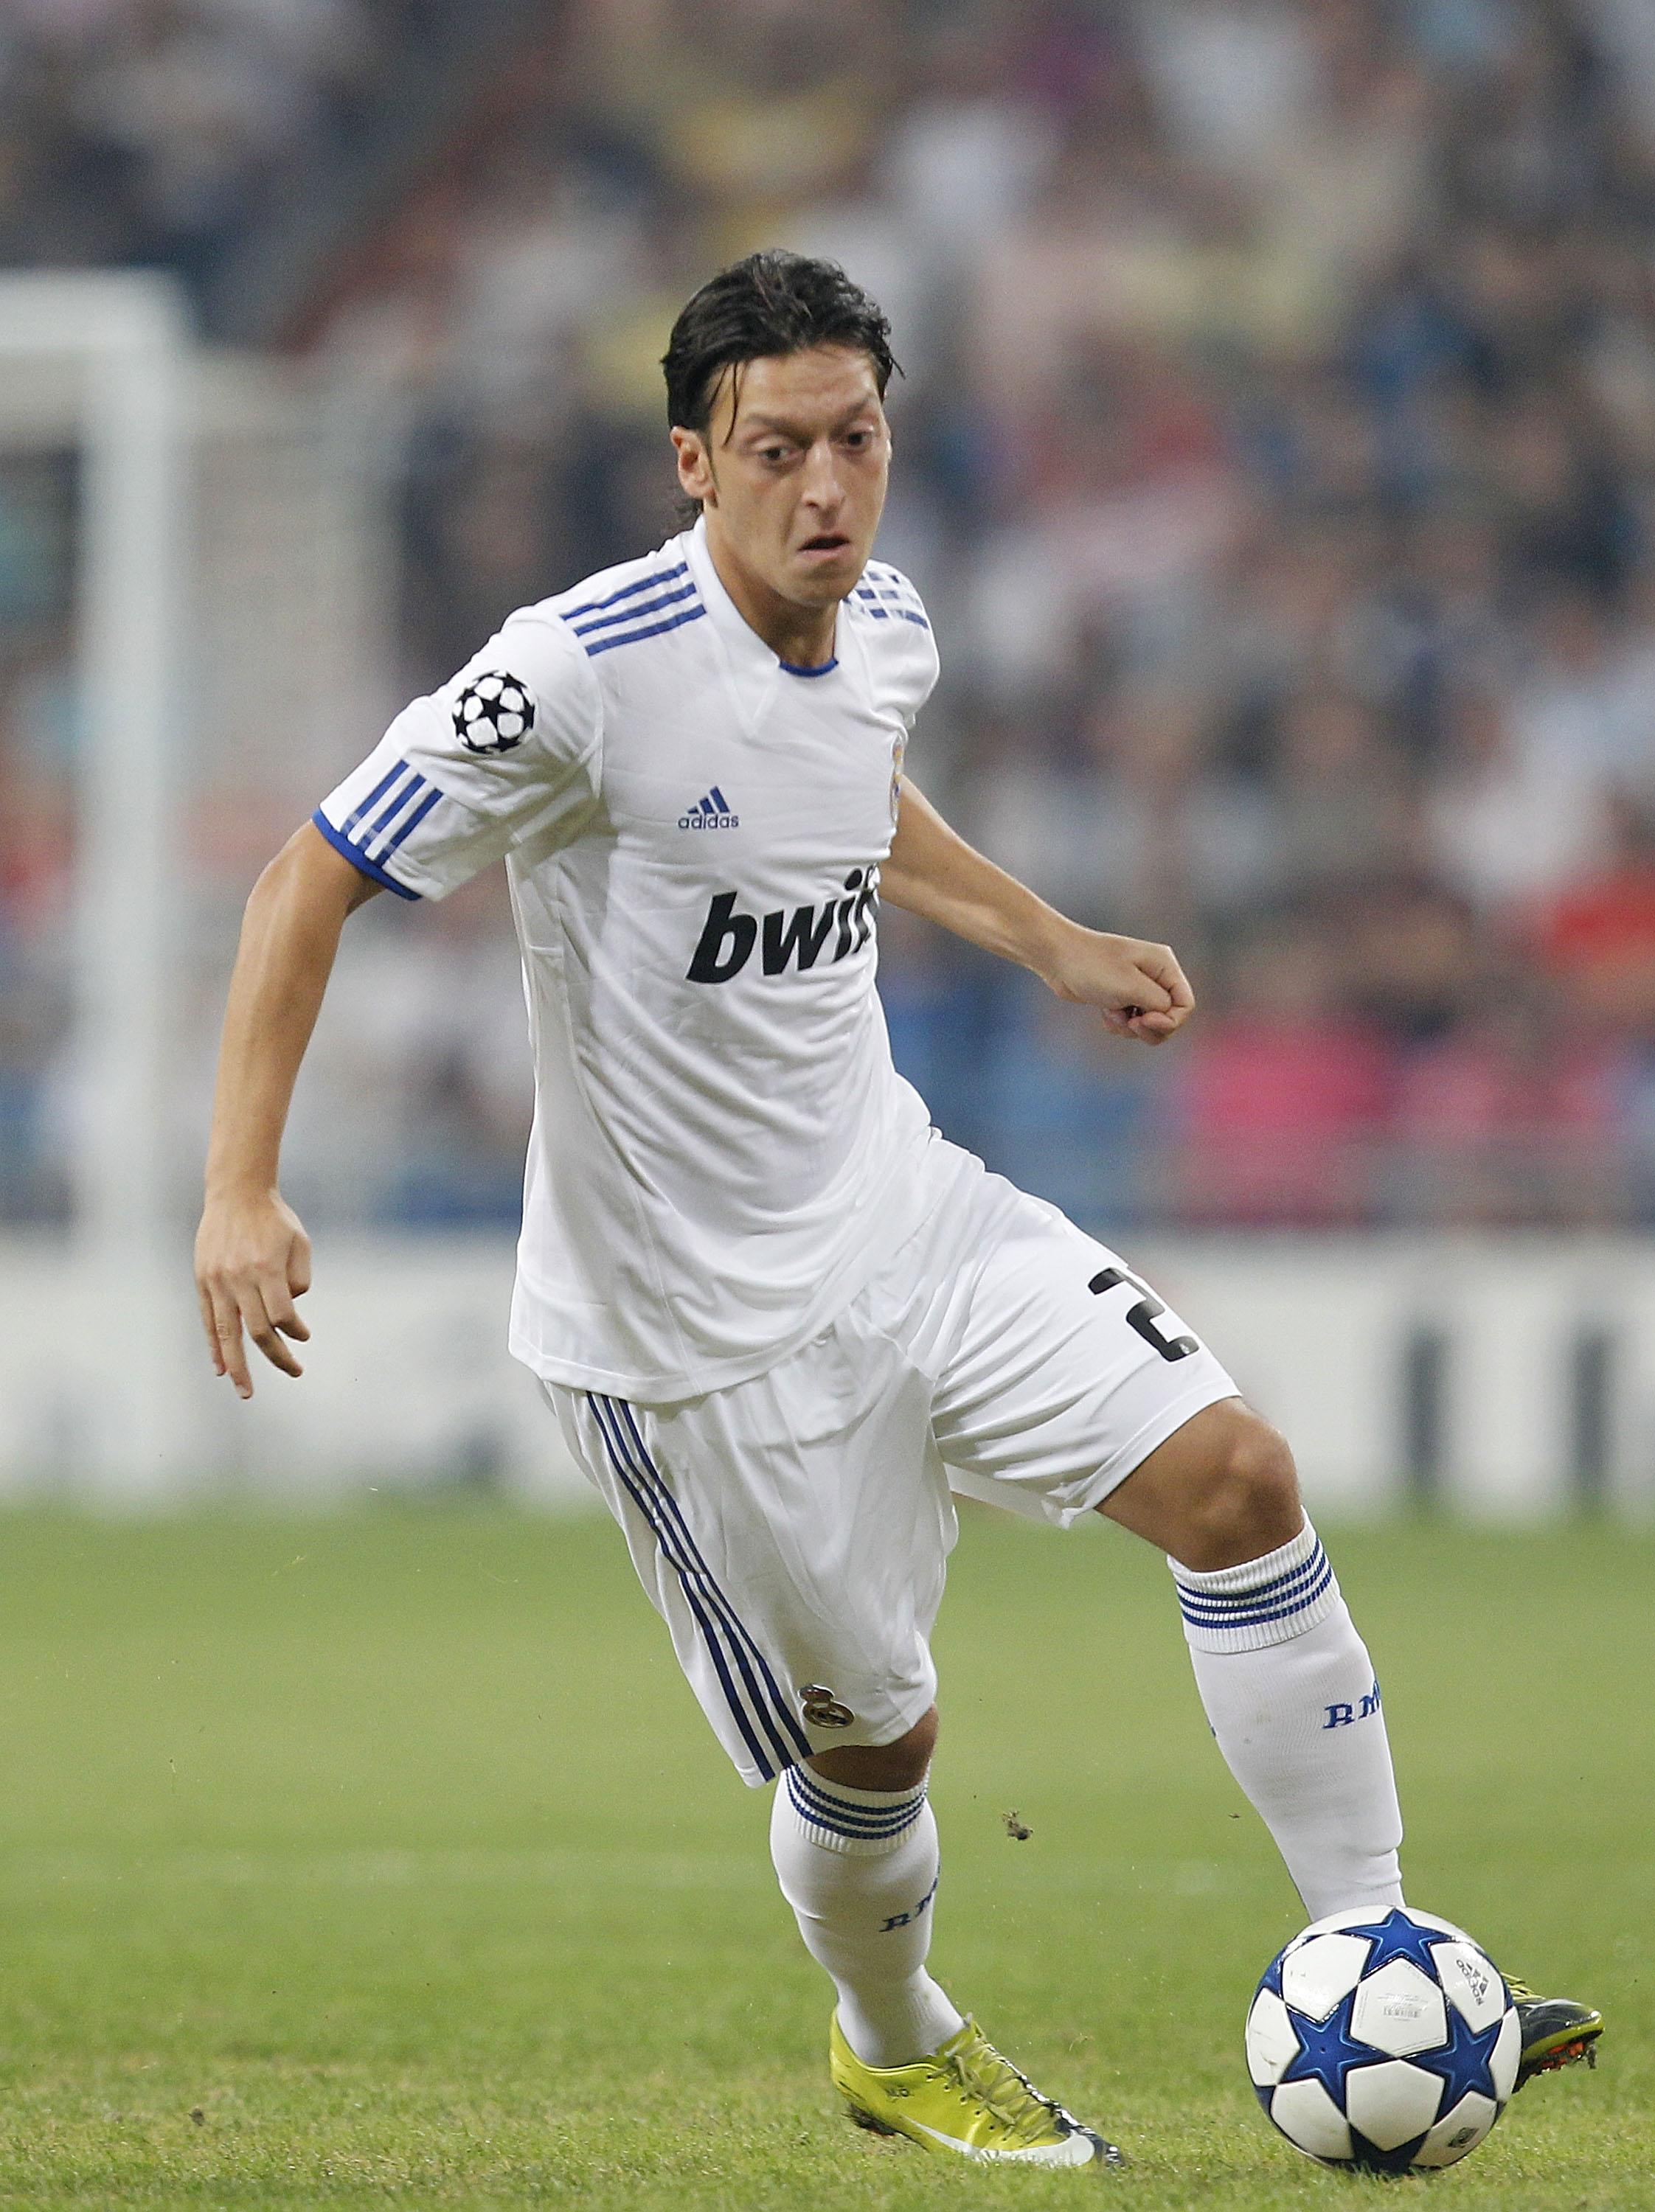 MADRID, SPAIN - SEPTEMBER 15:  Mesut Ozil of Real Madrid in action during the UEFA Champions League group G match between Real Madrid and AFC Ajax at Estadio Santiago Bernabeu on September 15, 2010 in Madrid, Spain.  (Photo by Angel Martinez/Getty Images)